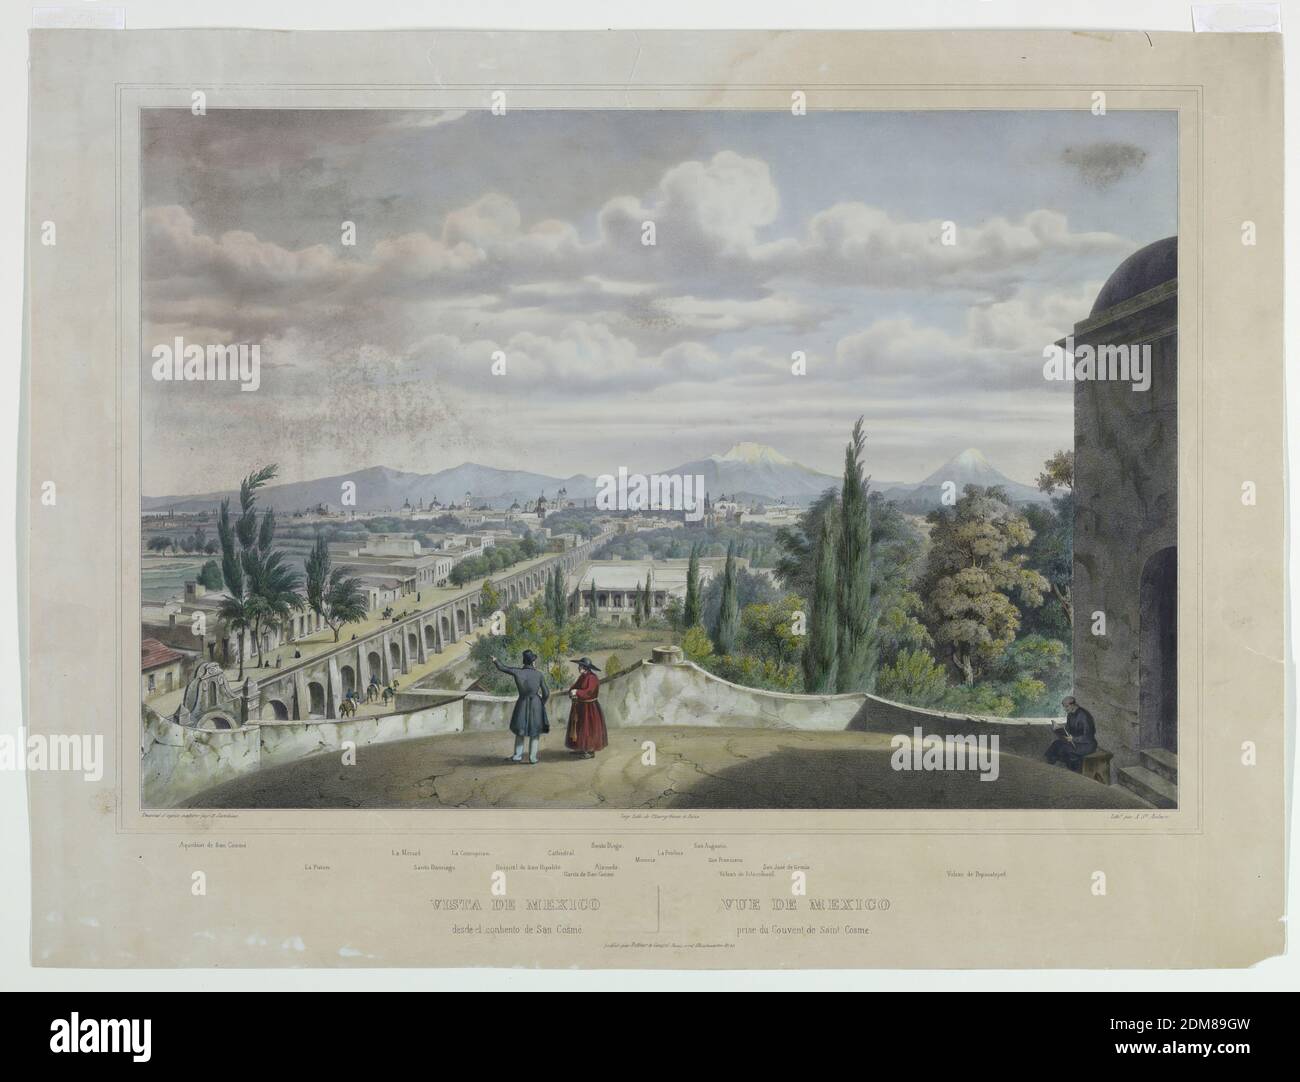 View of Mexico City, S. Sarokins, active 19th c., Félix Achille Saint-Aulaire, French, 1801 - after 1838, Chromolithograph on paper, Panoramic view of Mexico City, with the Aqueduct de San Cosmé at the left and Mount Popocatepetl at right. Below, monuments indicated, and title in French and Spanish; also artists' and publisher's names., Paris, France, 1830–1840, Print Stock Photo